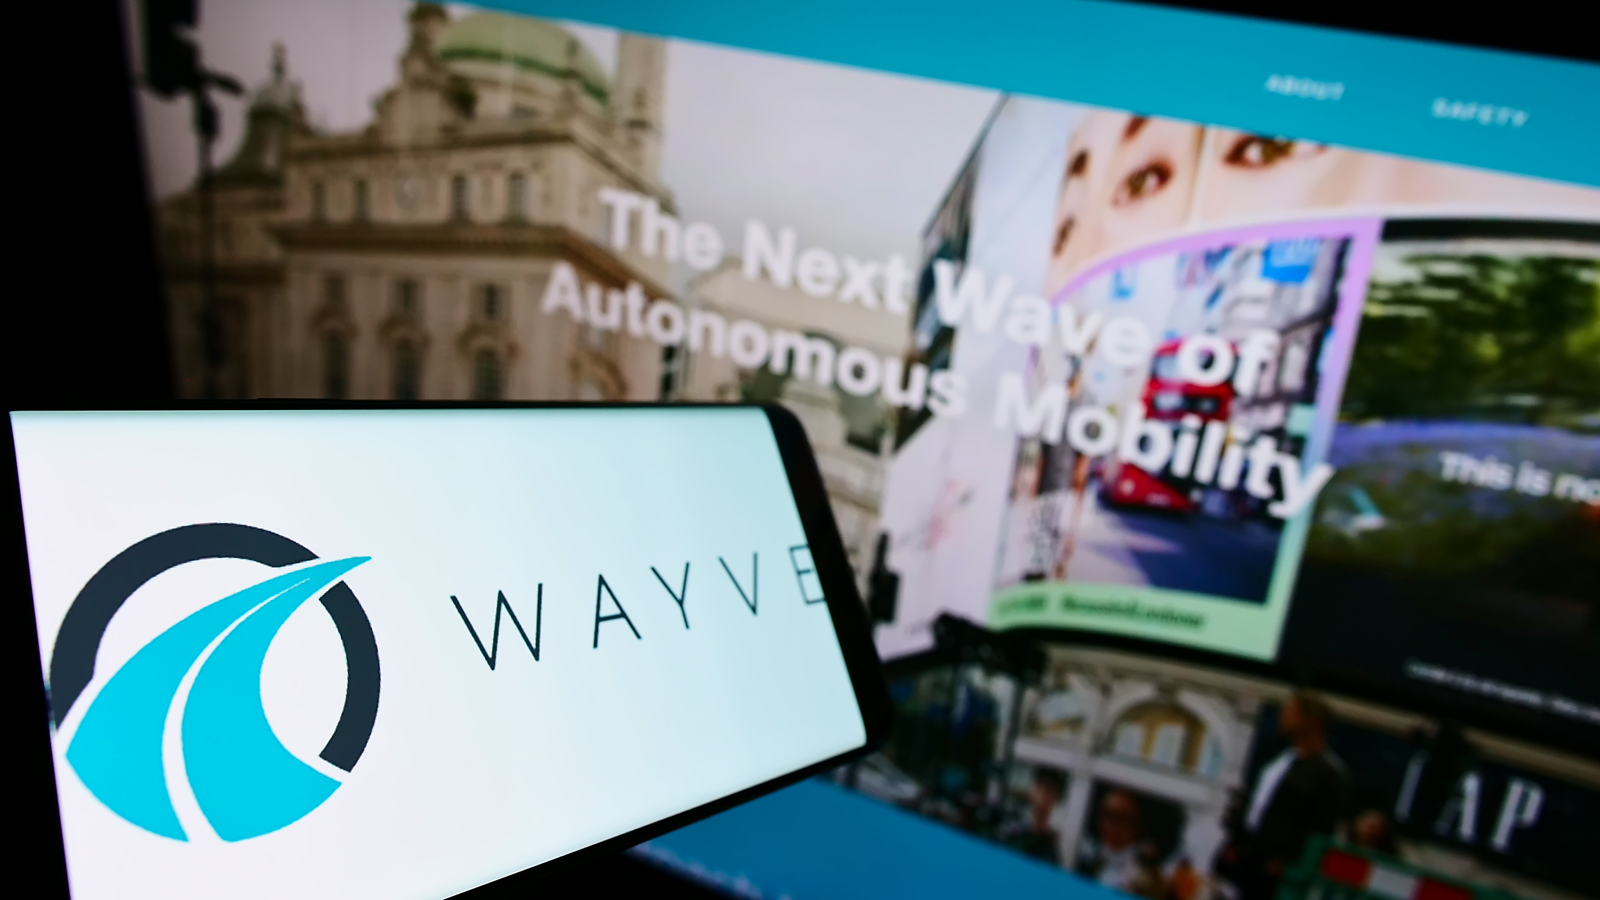 UK start-up Wayve secures over $1bn to further progress its AI tech for self-driving vehicles